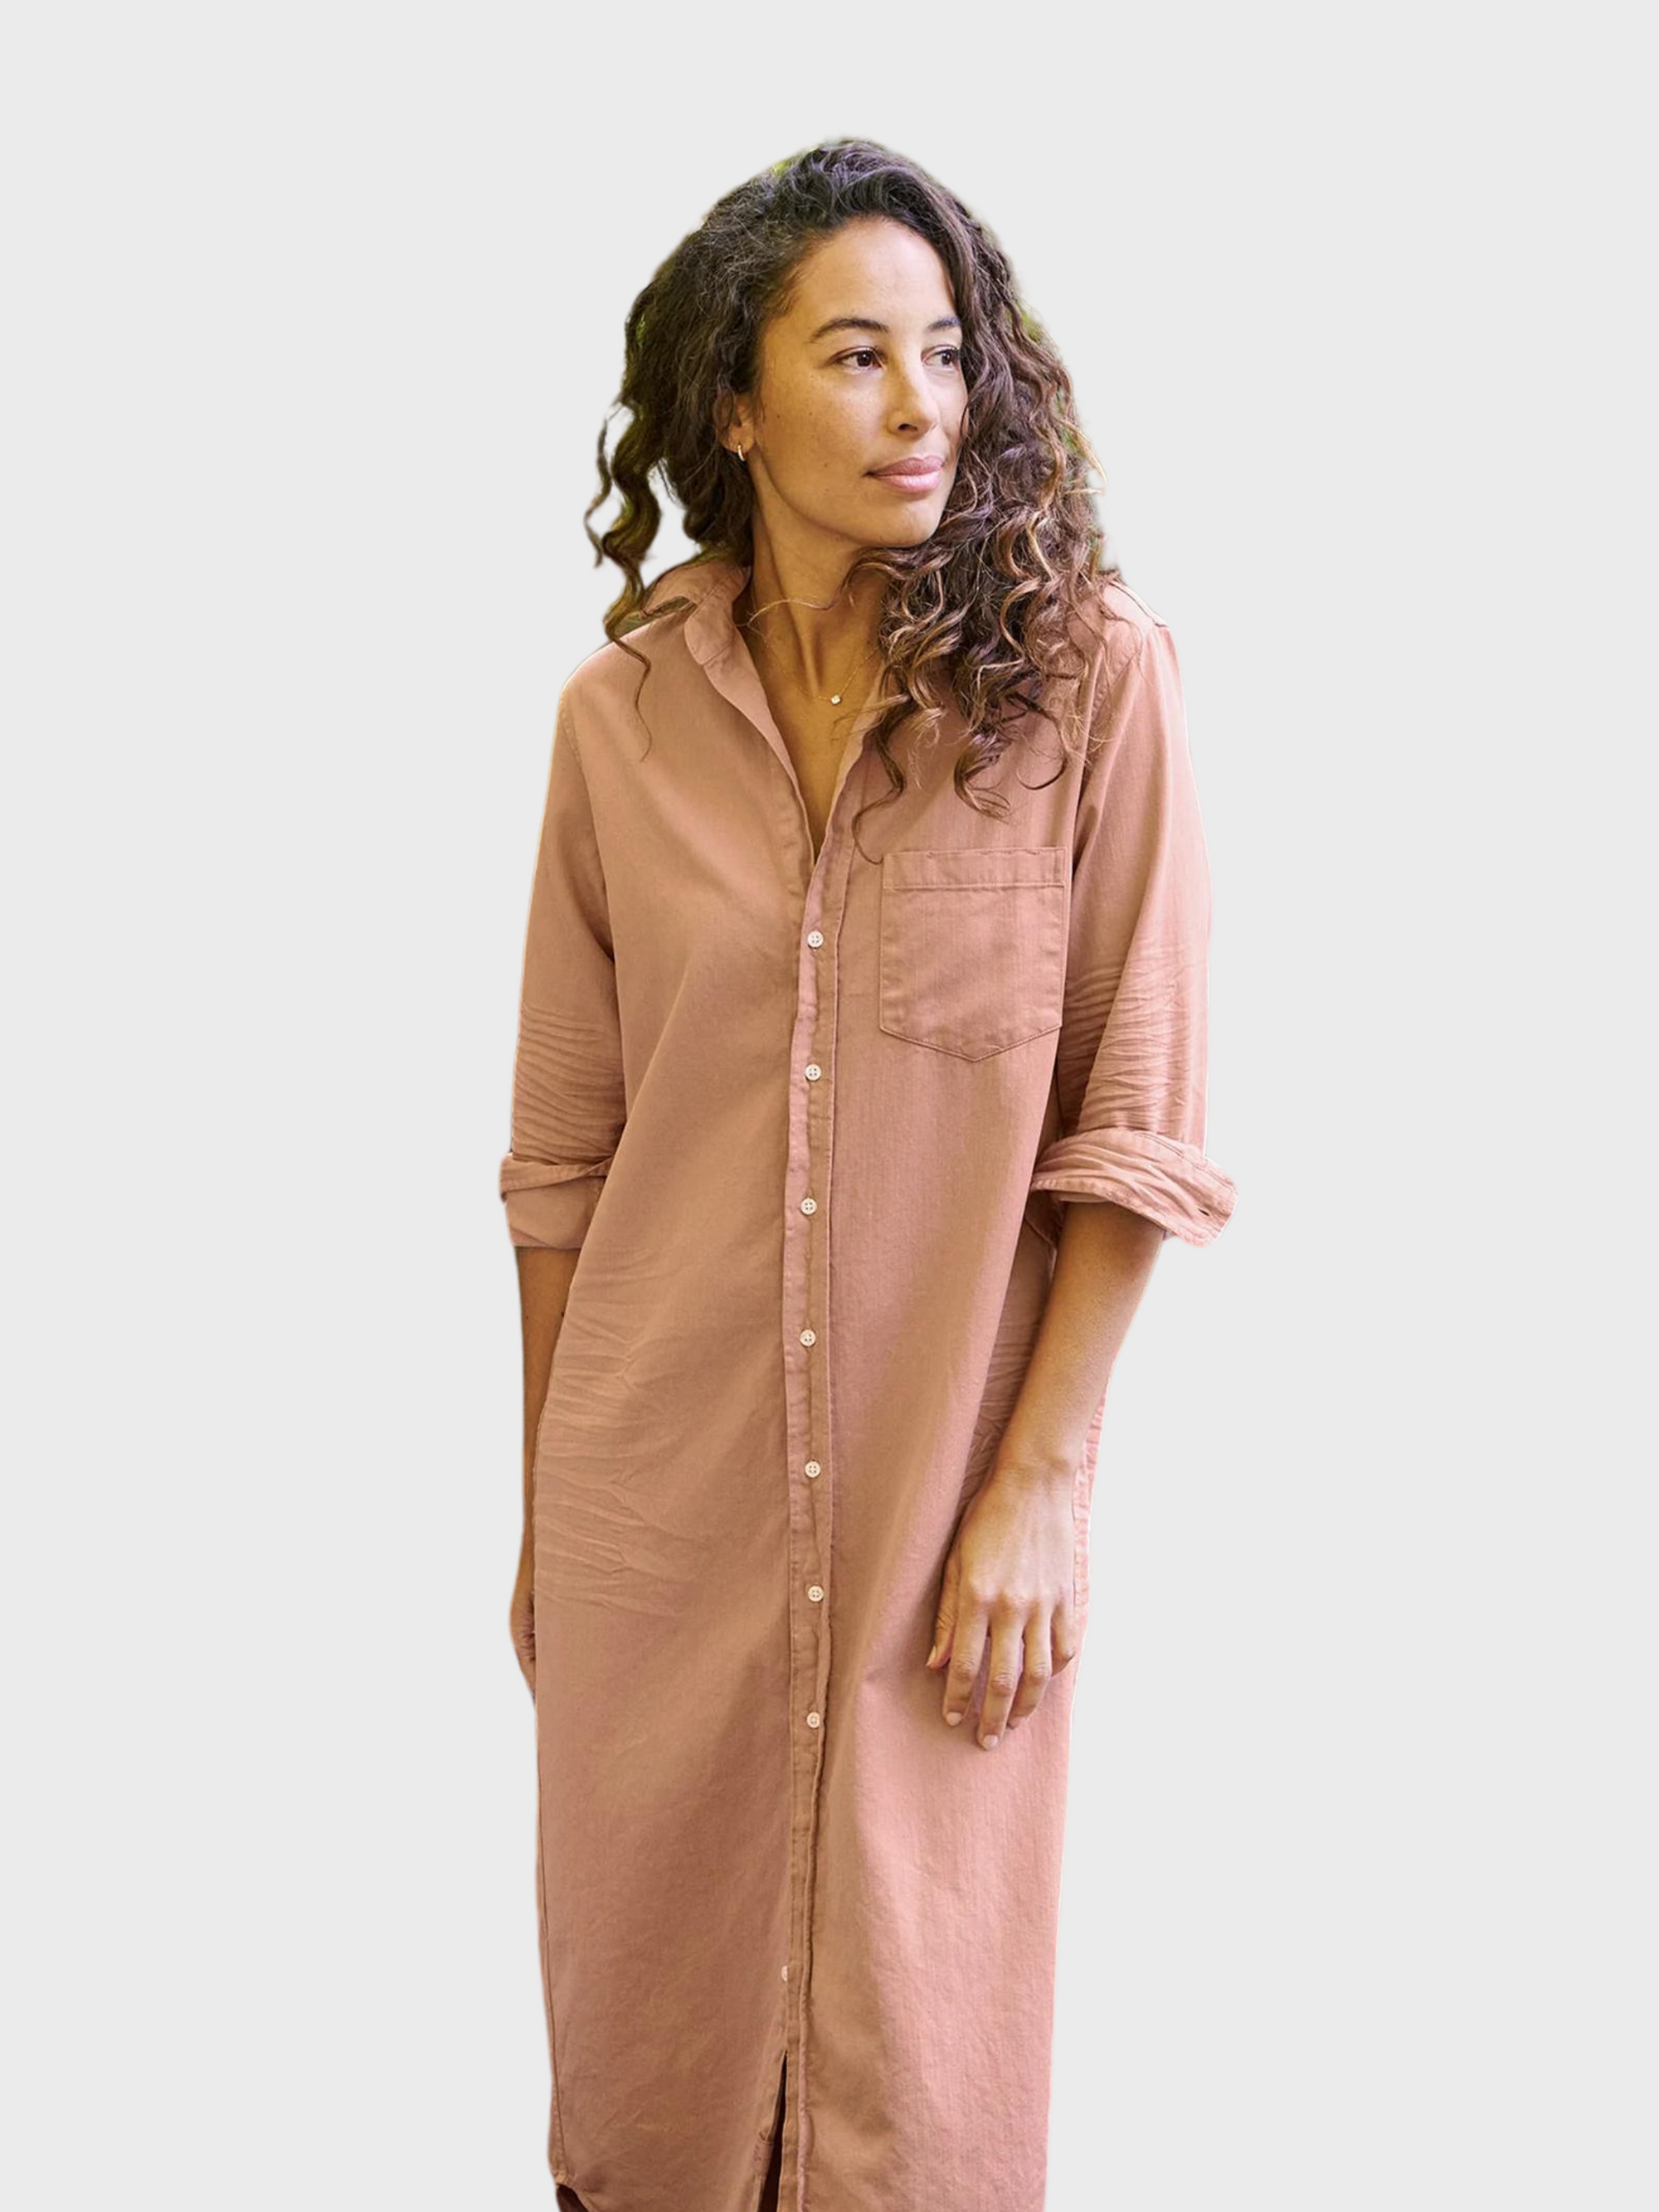 Frank & Eileen Rory Maxi Shirtdress Desert-Dresses-West of Woodward Boutique-Vancouver-Canada